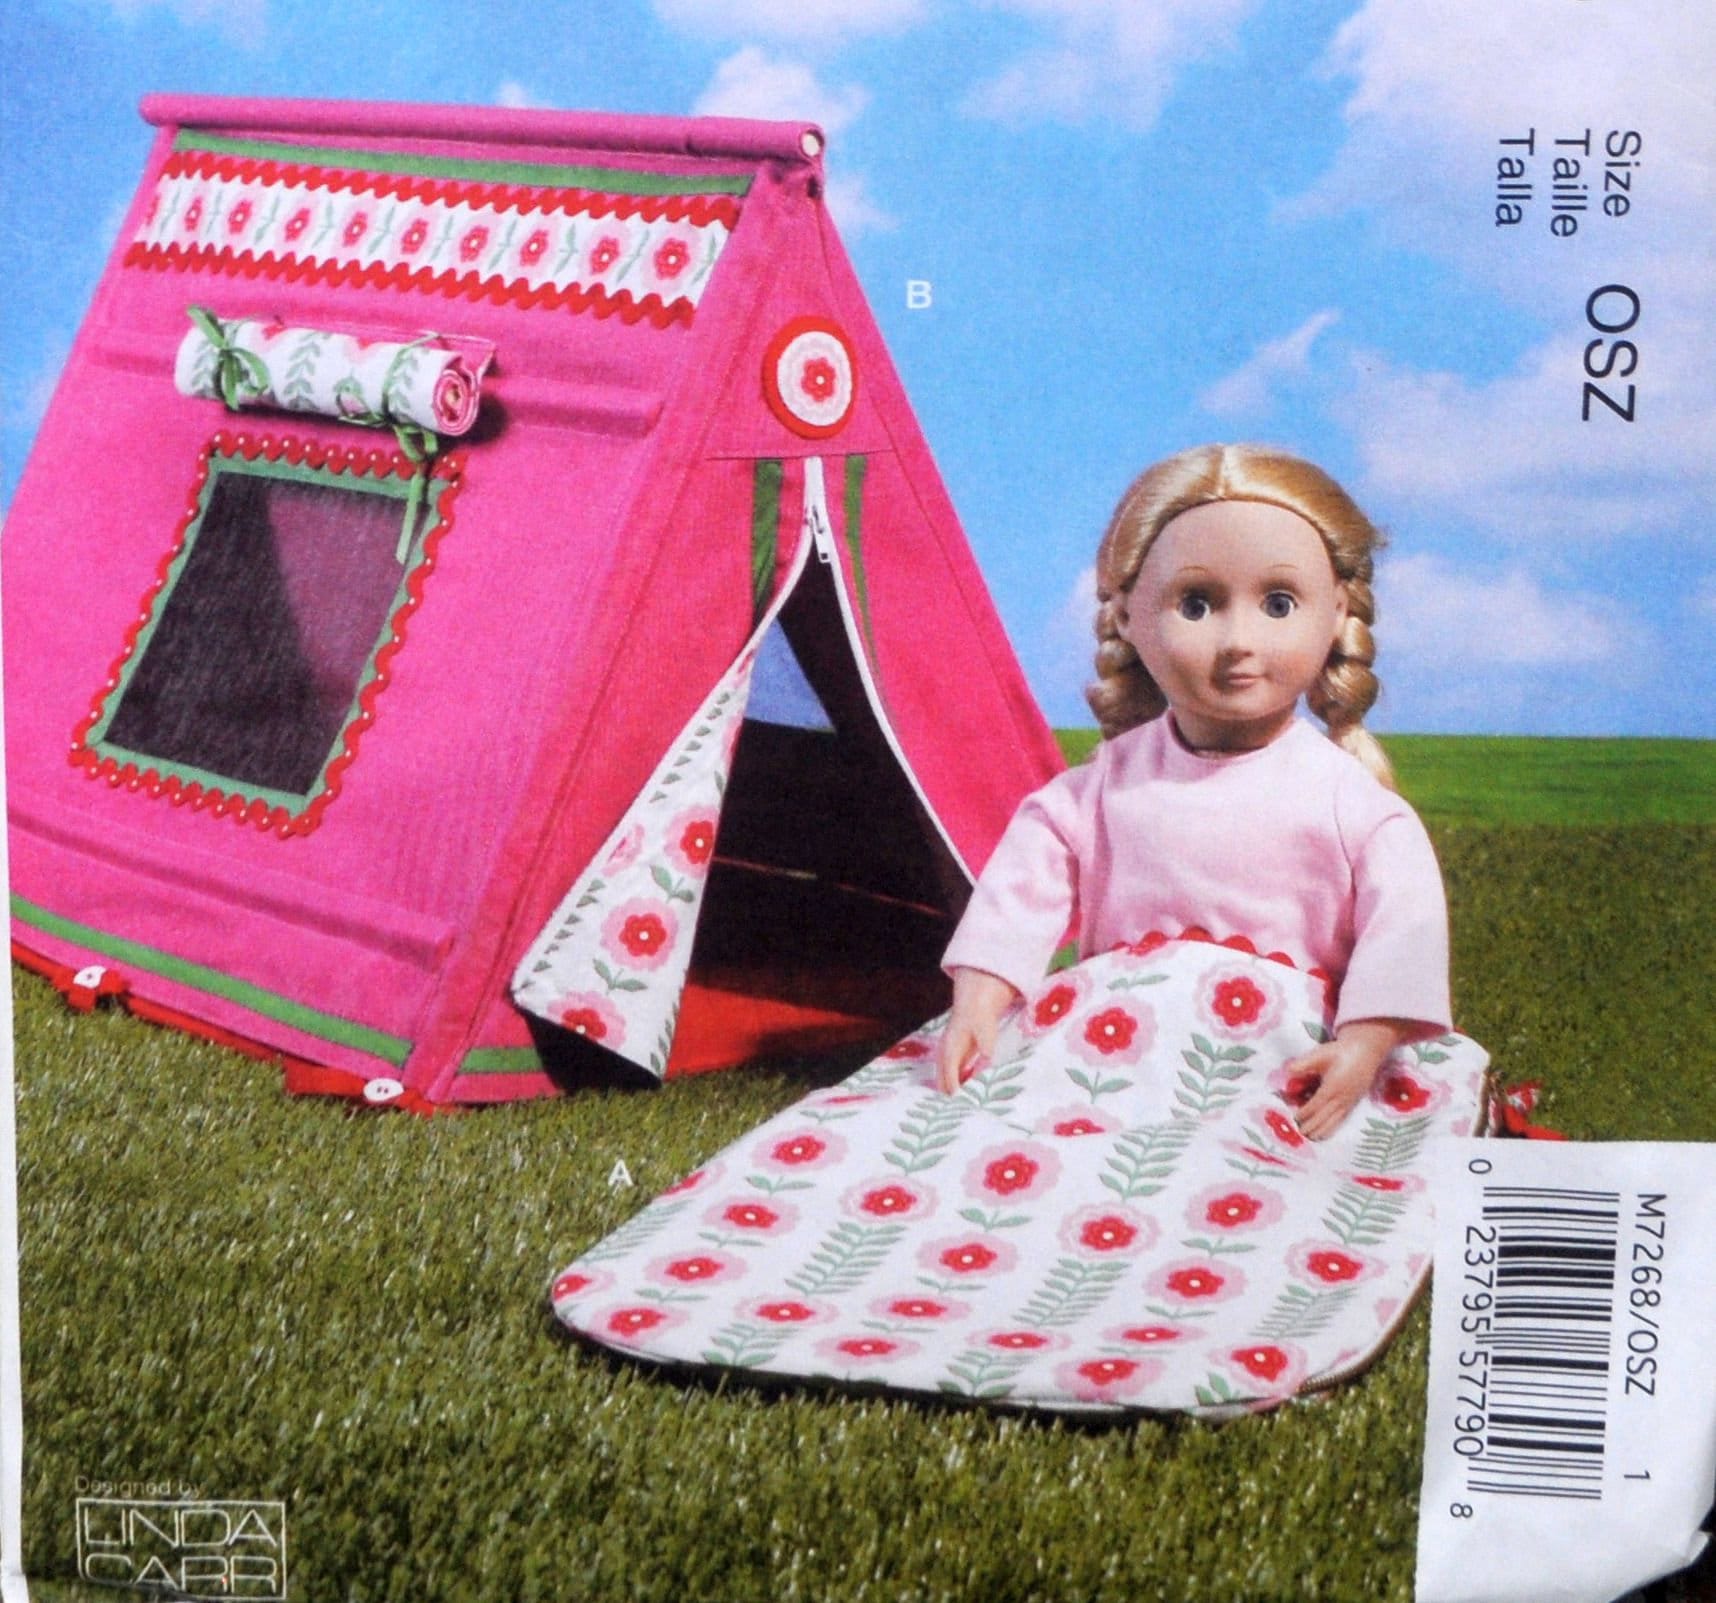 All Night Campsite, 18-inch Doll Tent Set